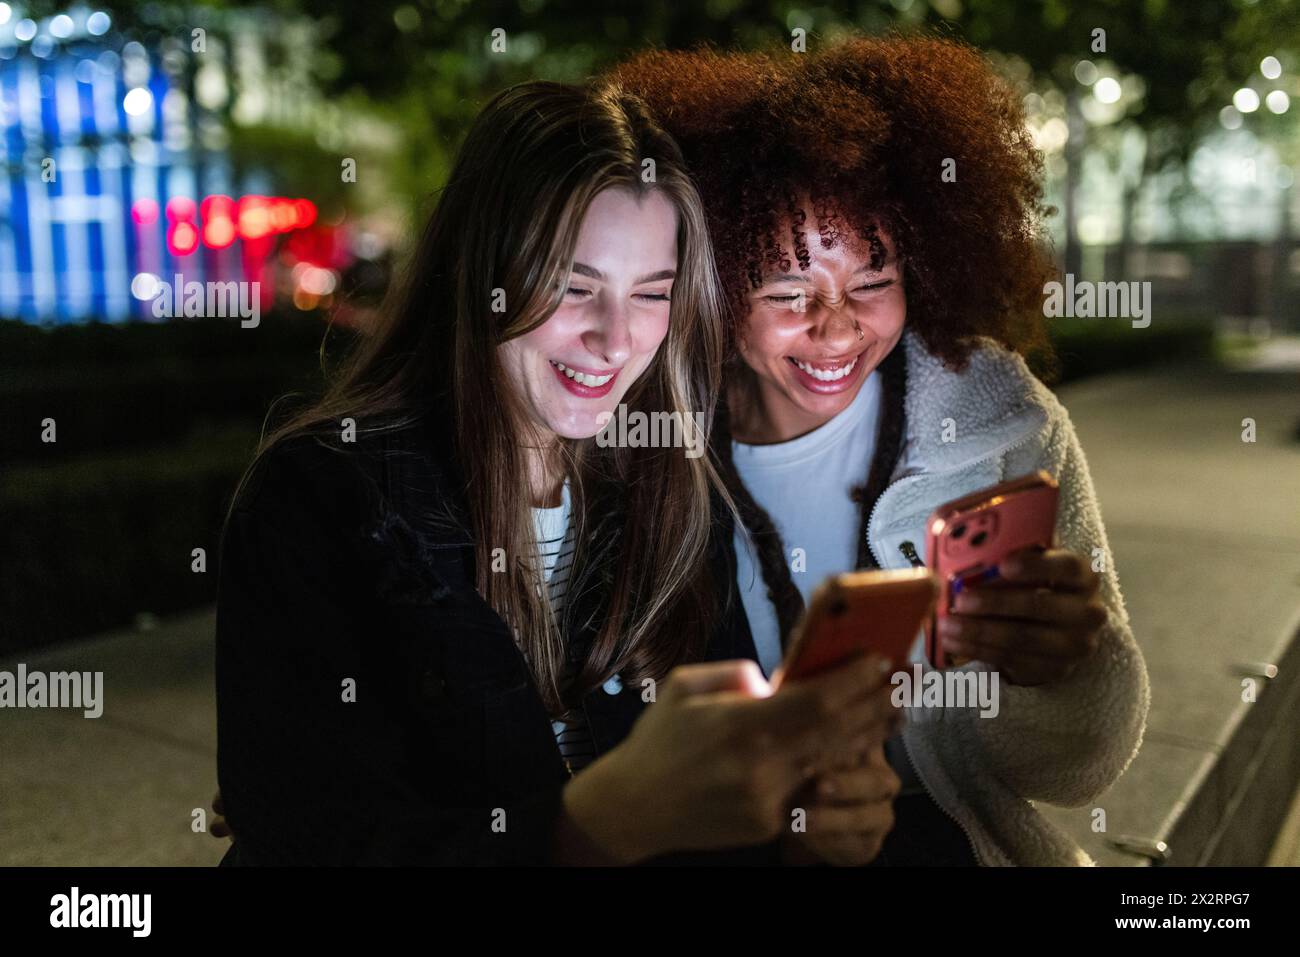 Happy young friends using smart phones at night Stock Photo